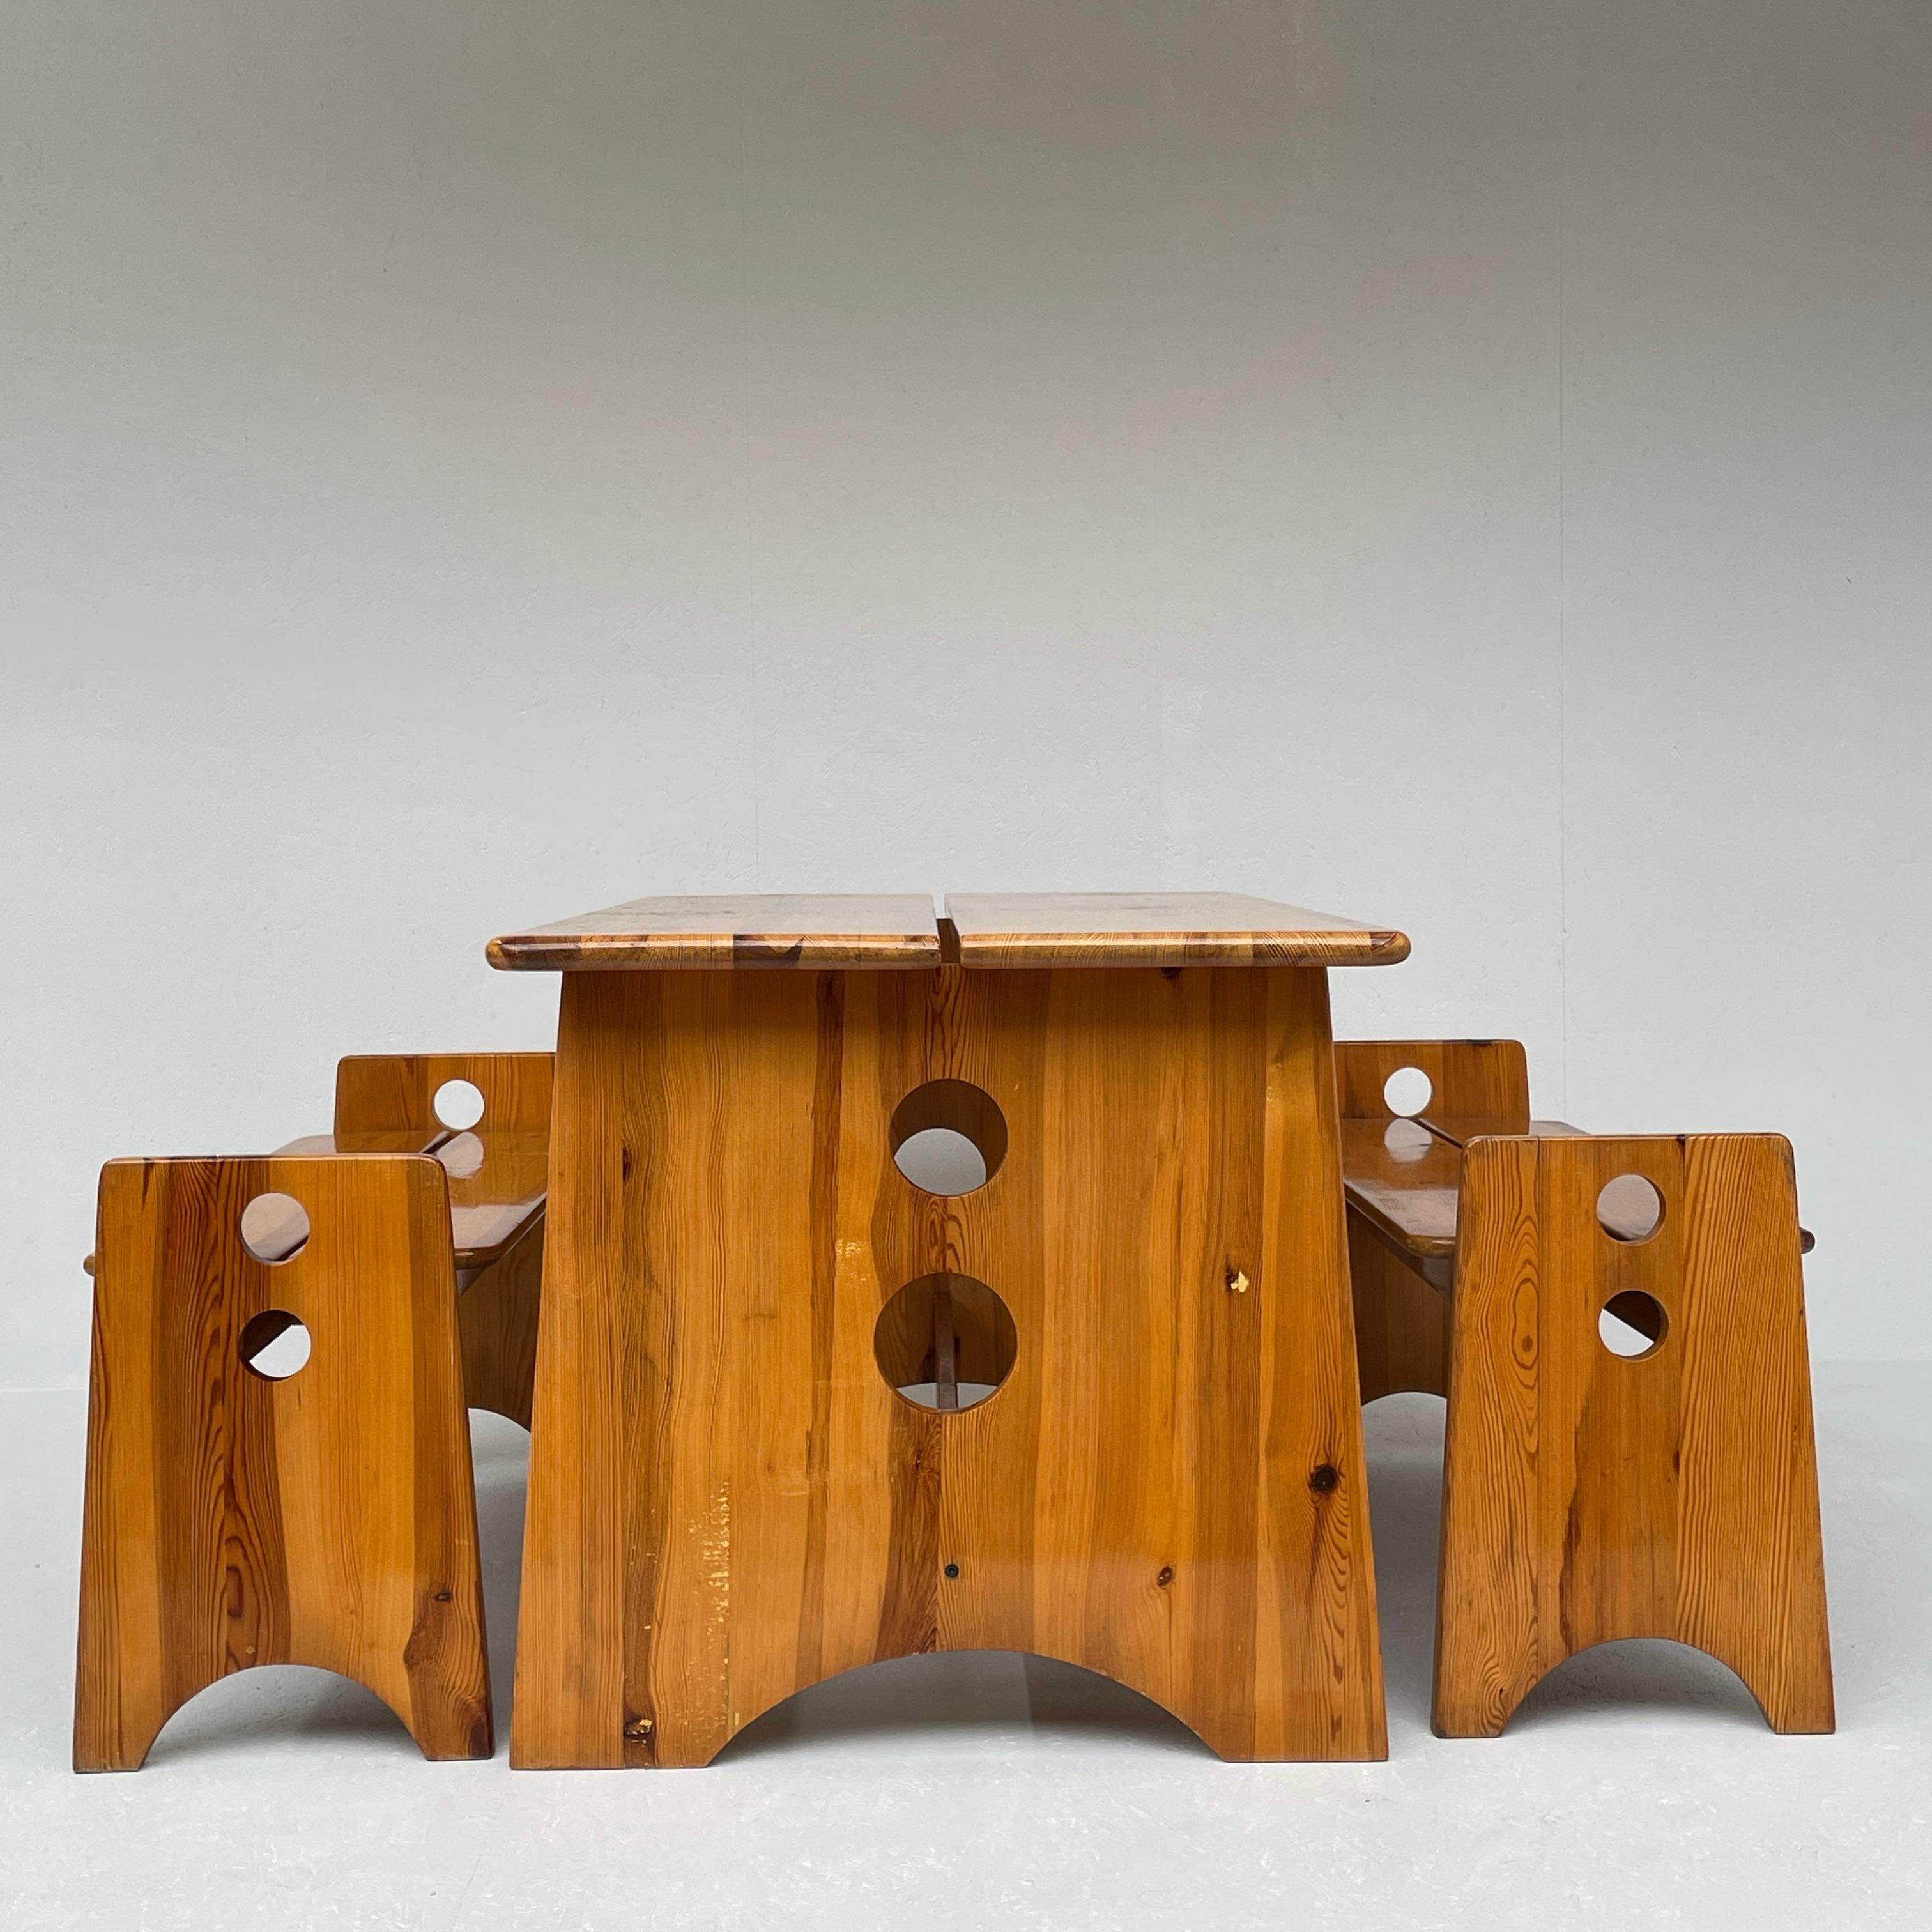 A Swedish solid wood dining set. A draft of Gilbert Marklund for Furunickarn.

AB. Period: 1969. 

This Vintage dining room set includes a handmade ash table with two matching sofas. The two benches can be pushed under the table. Ideal for